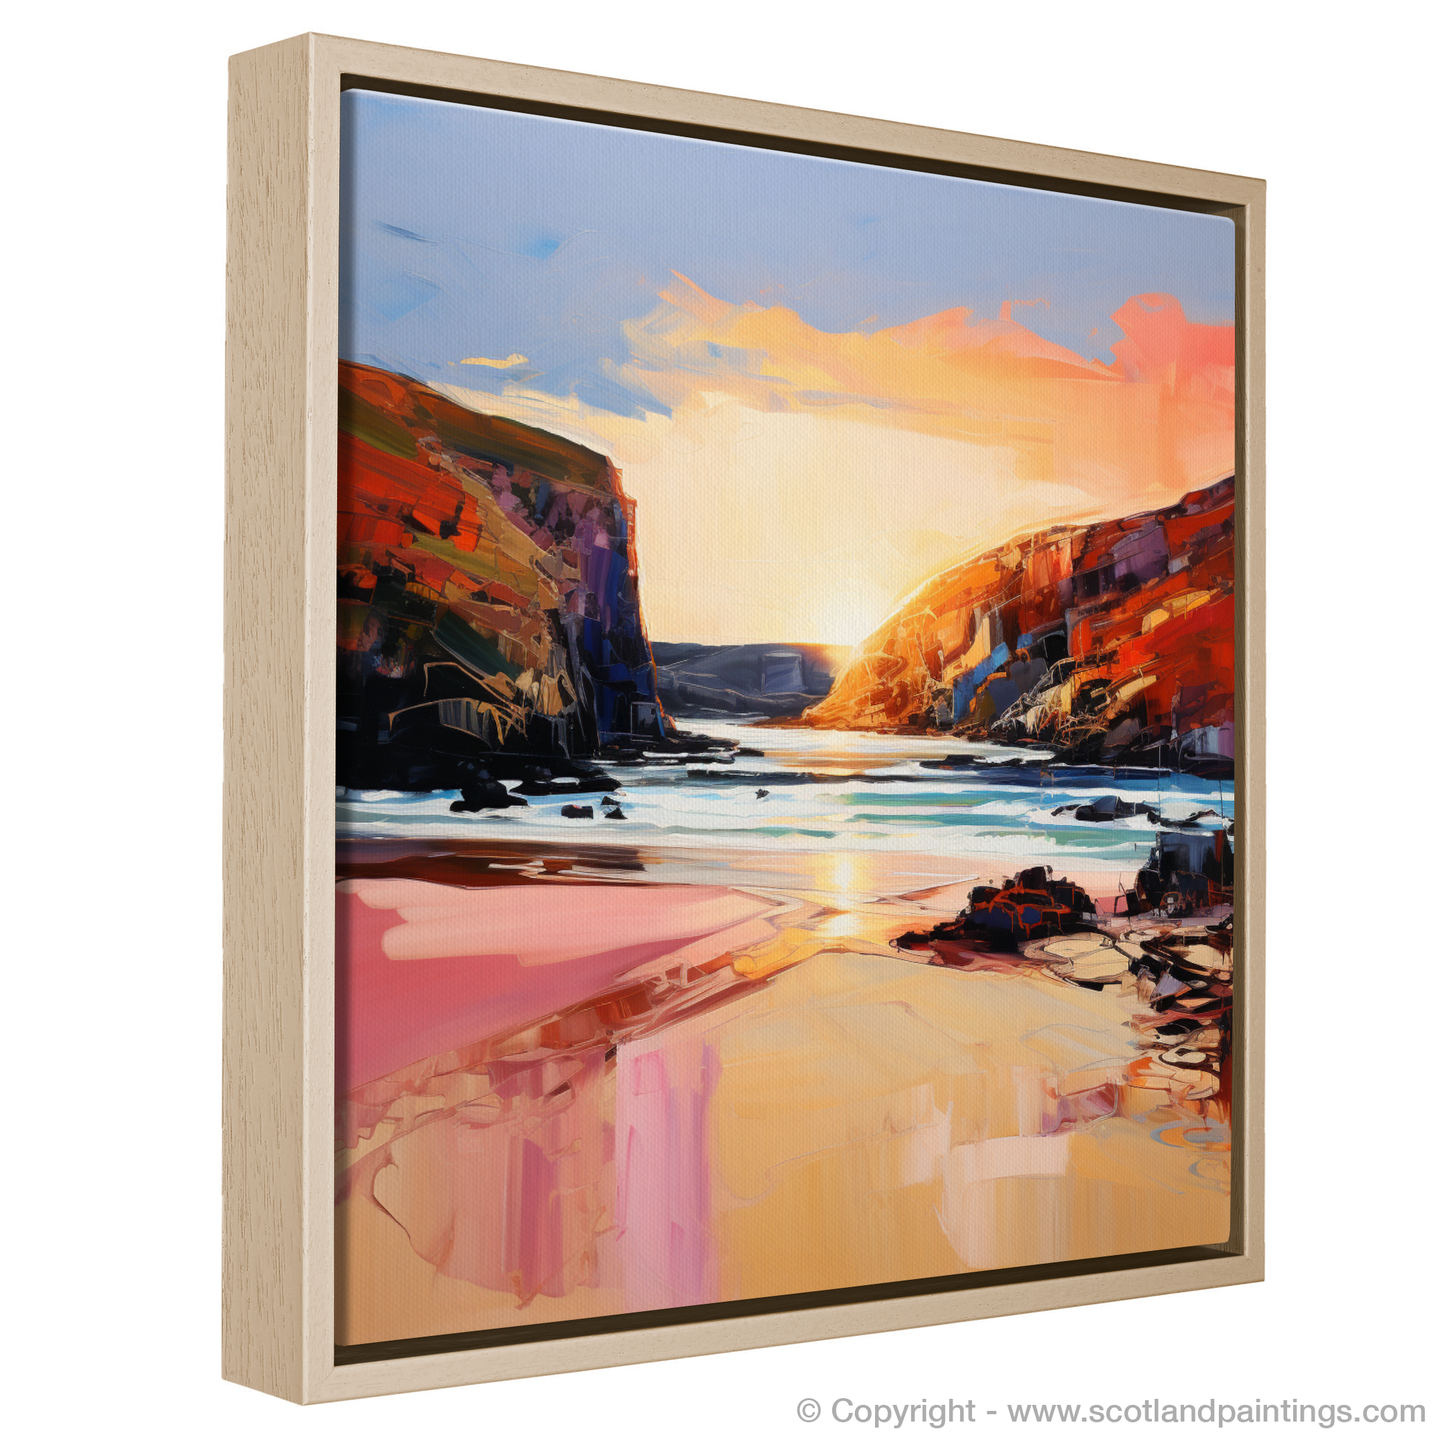 Painting and Art Print of Sandwood Bay at golden hour entitled "Golden Hour Majesty at Sandwood Bay".